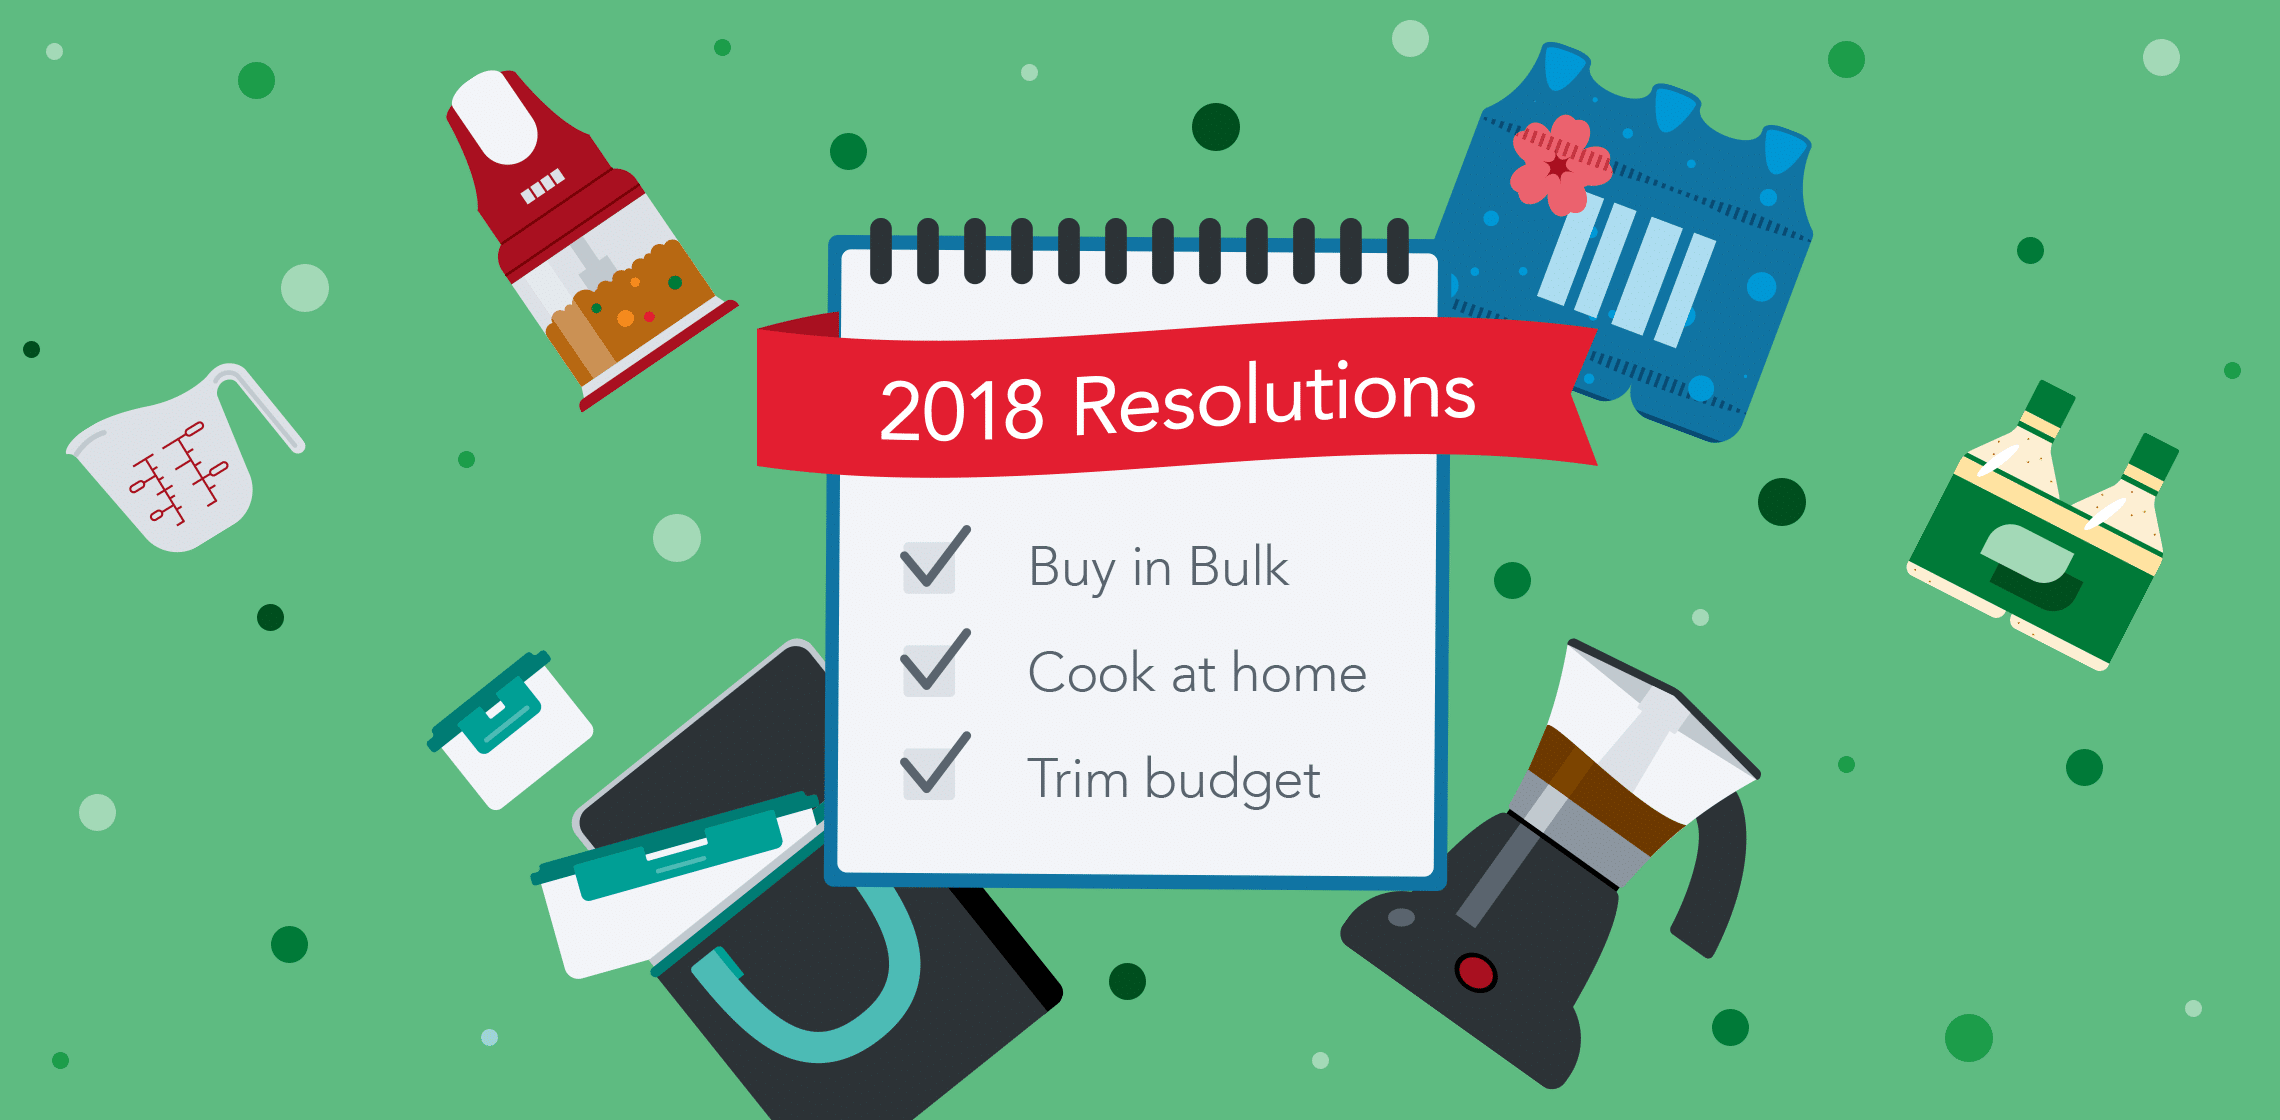 Stick to your New Year’s resolution to save money with Shopkick